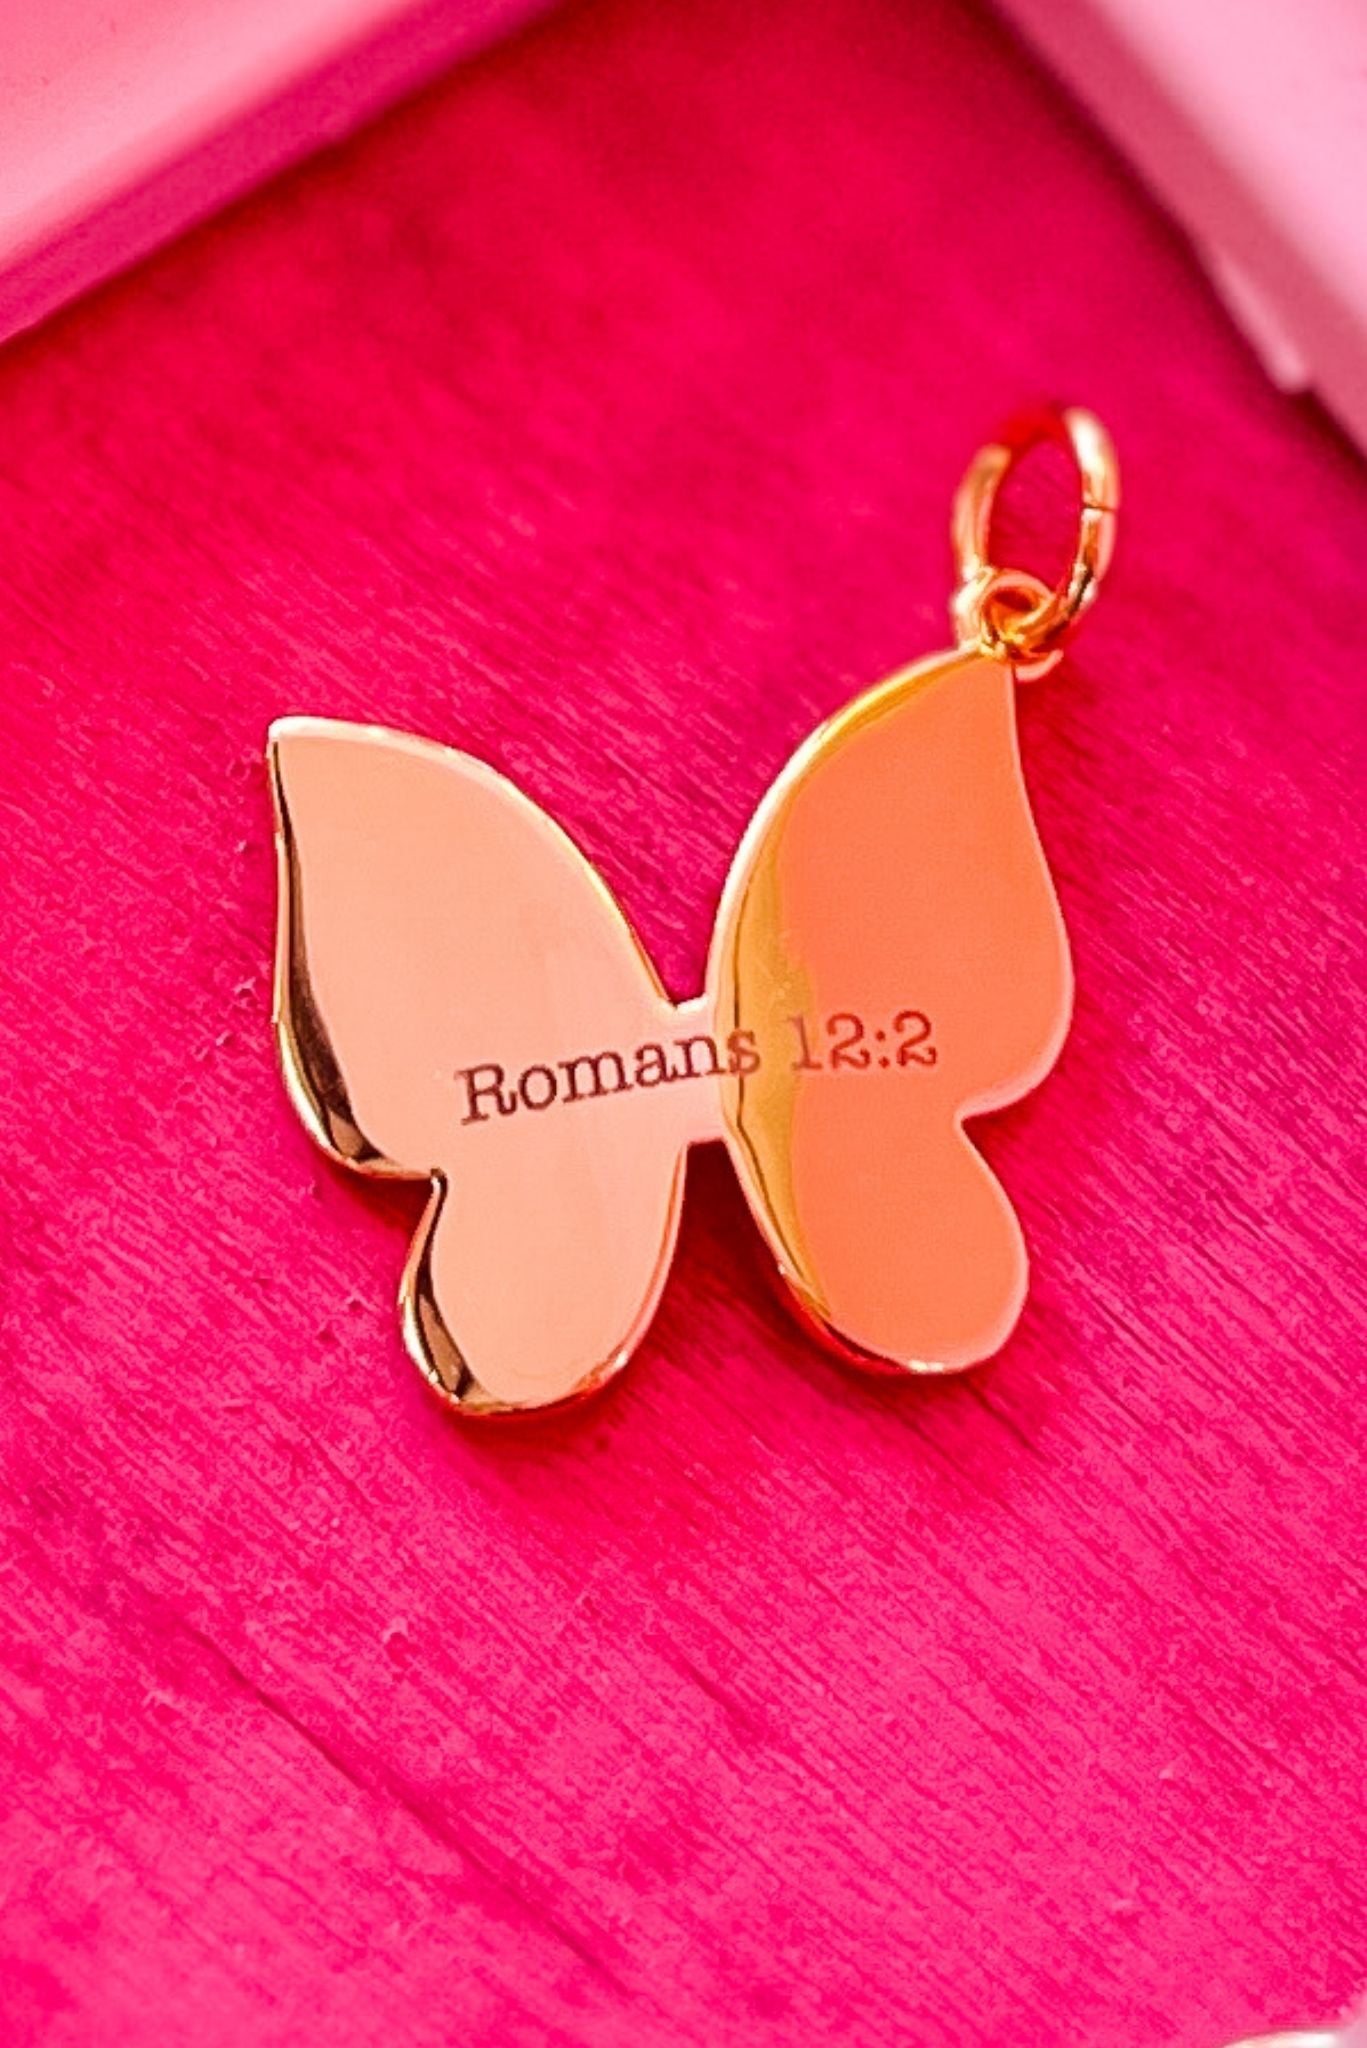 SSYS Scripture Butterfly Charm, ssys the label, must have charm, must have charm necklace, elevated charm, elevated charm necklace, acessories, scripture charm, scripture, gift, mom style, shop style your senses by mallory fitzsimmons